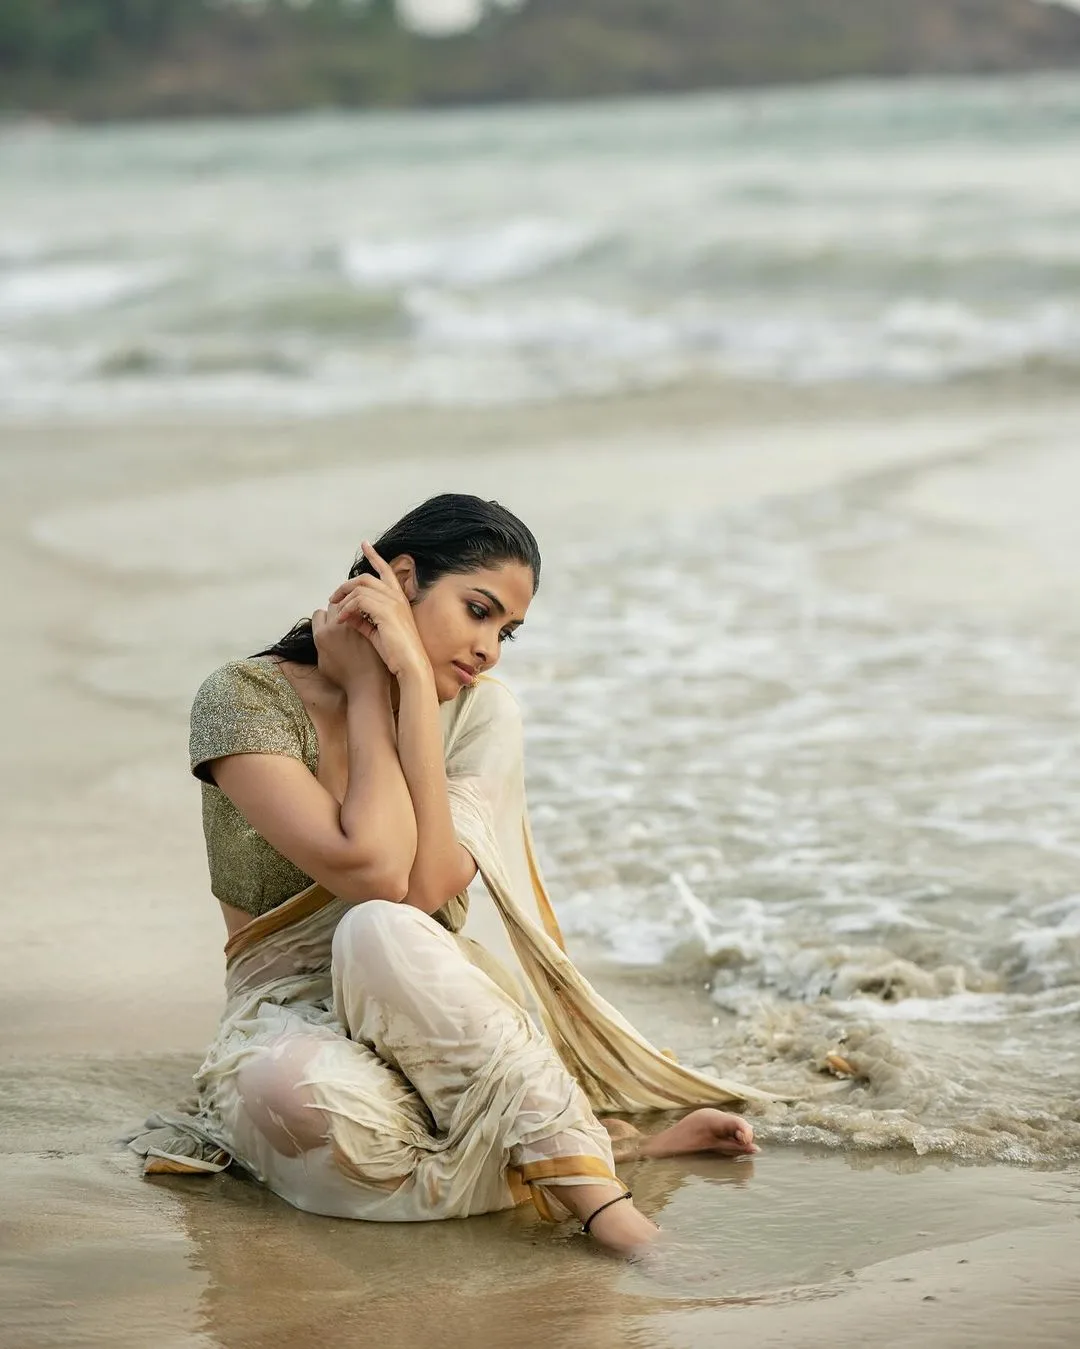 divi vadthya latest photoshoot in beach